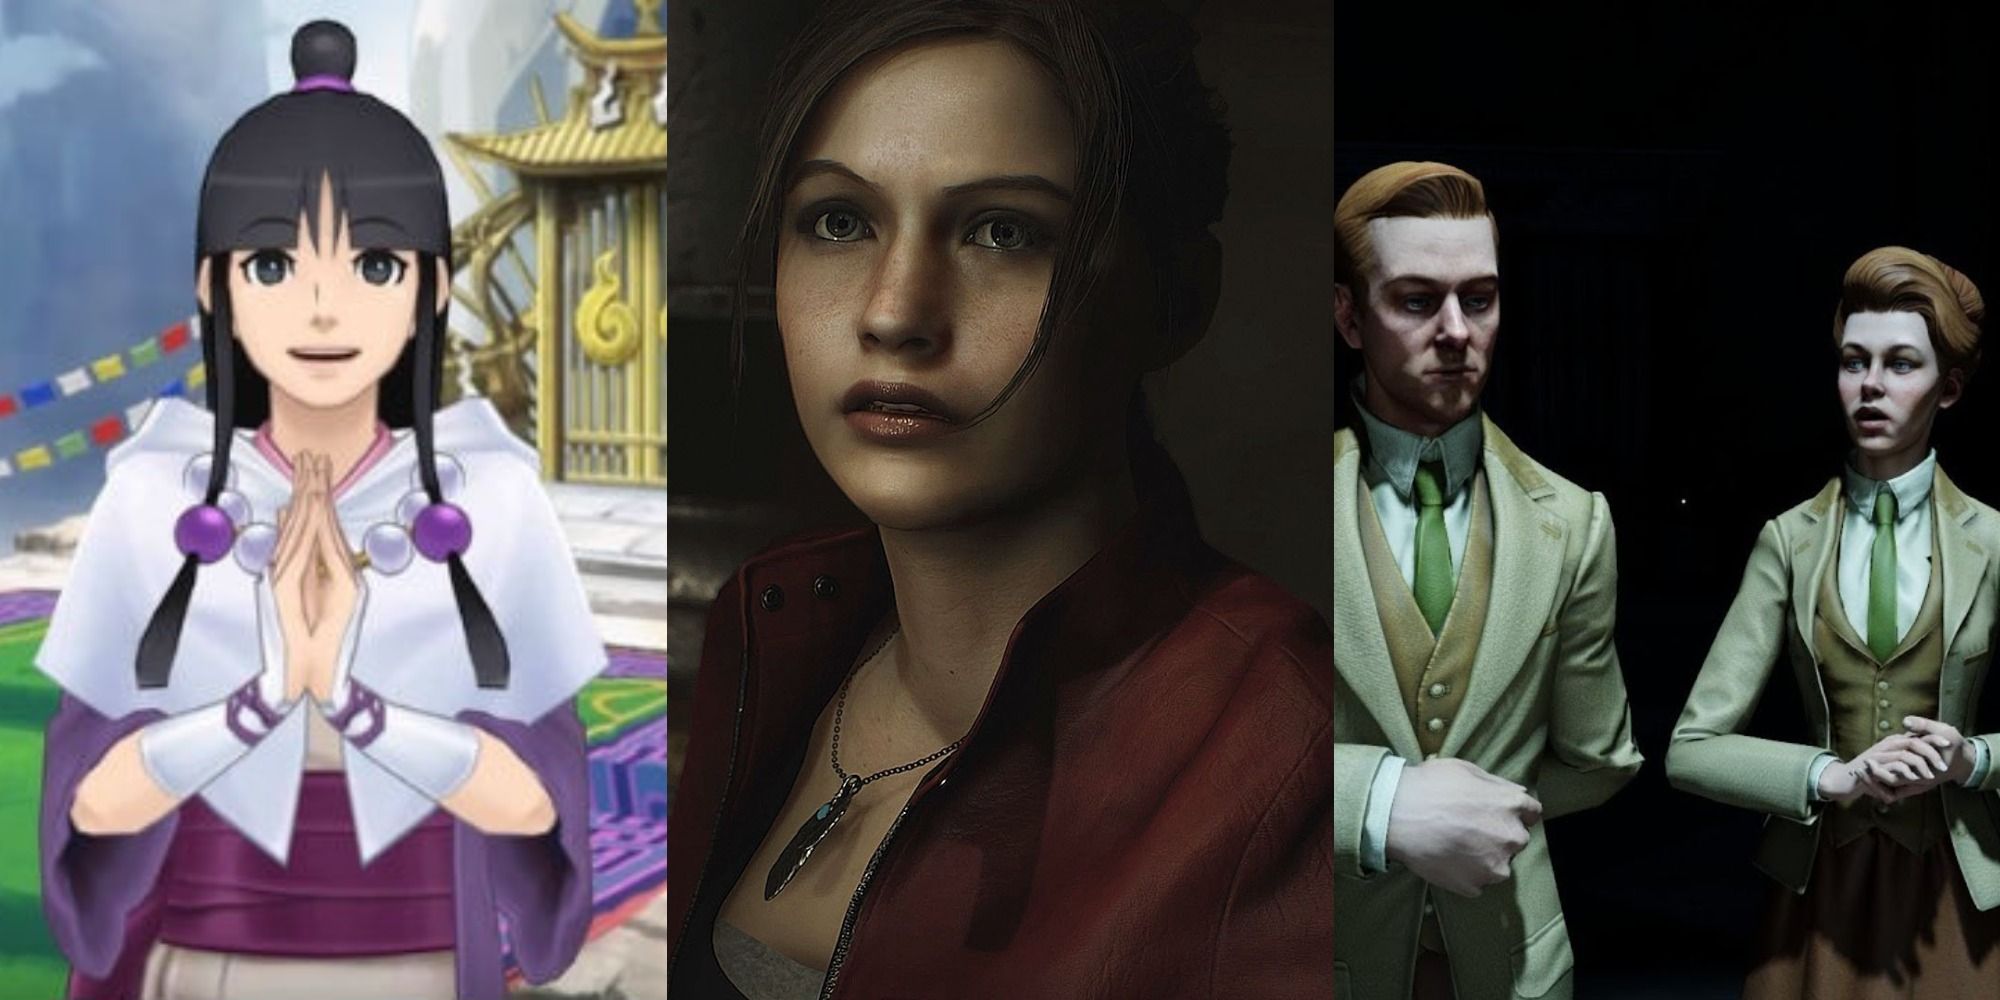 Best Sisters in Videogames split featured Maya Fey, Claire Redfield, and Lutece Twins